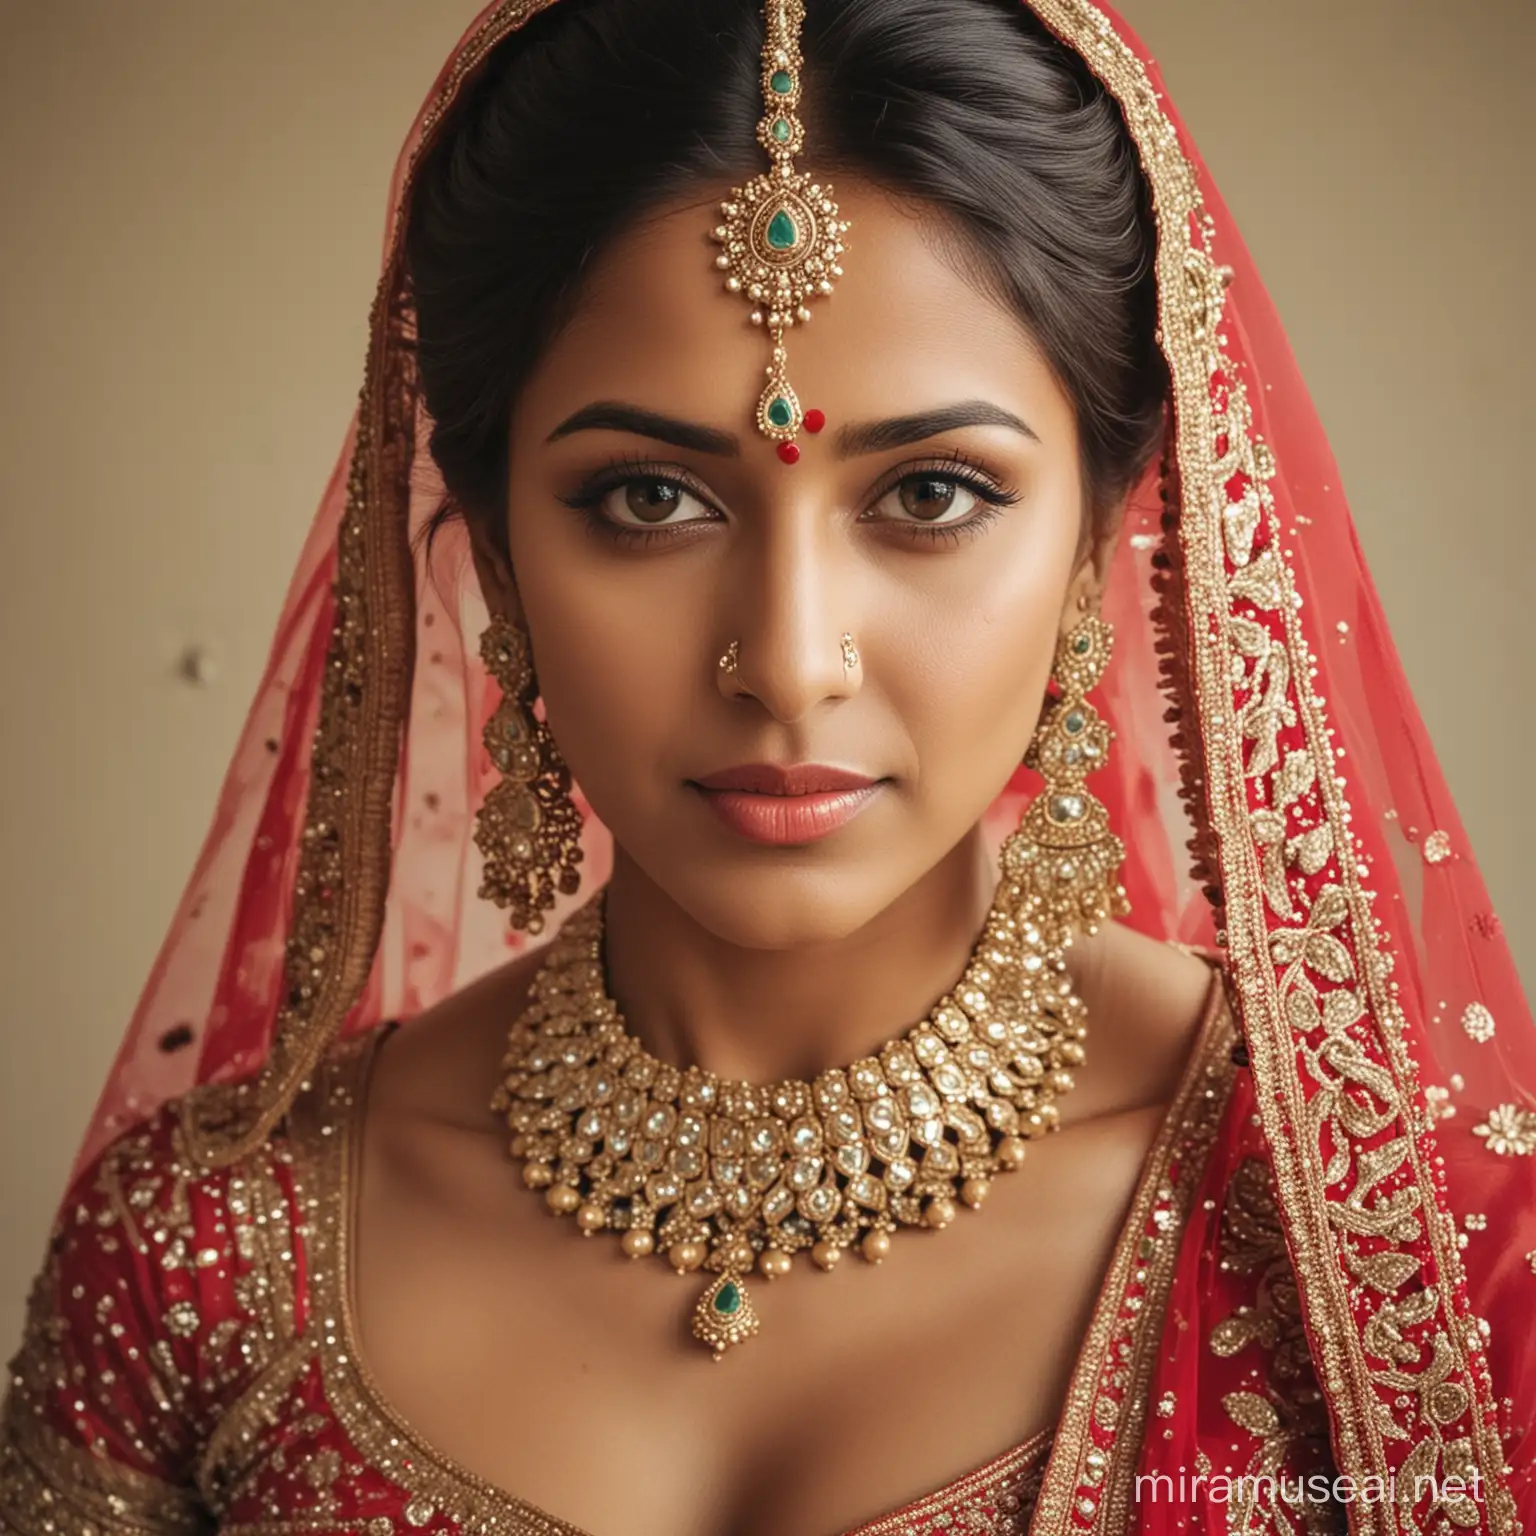 Traditional Indian Bride with Intricate Henna Designs